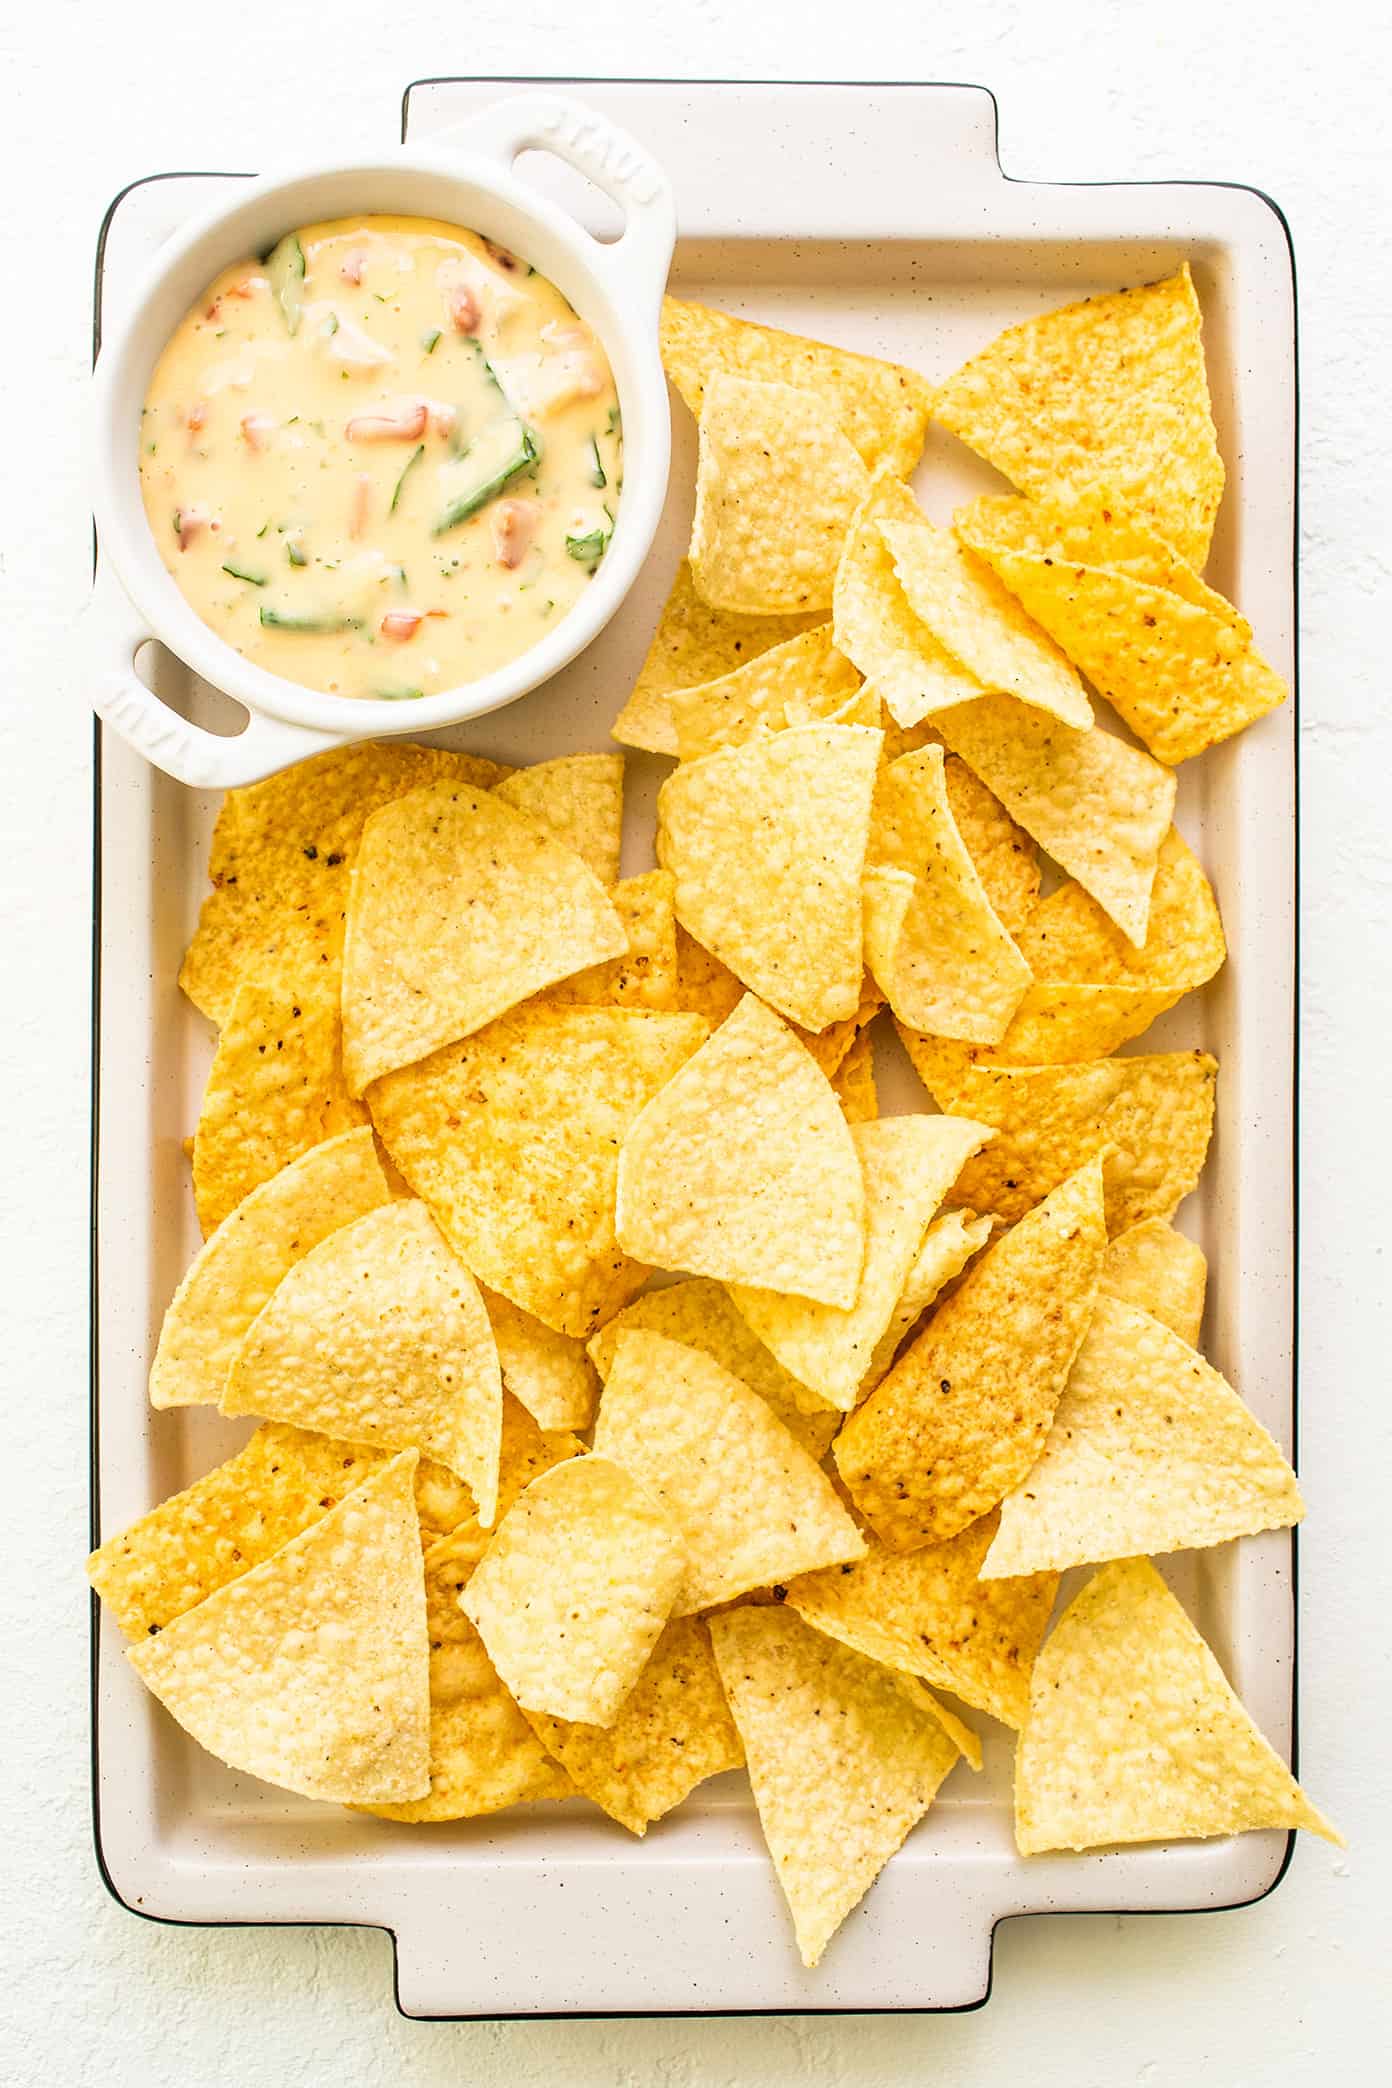 Potato Chips and Queso Blanco on Plate